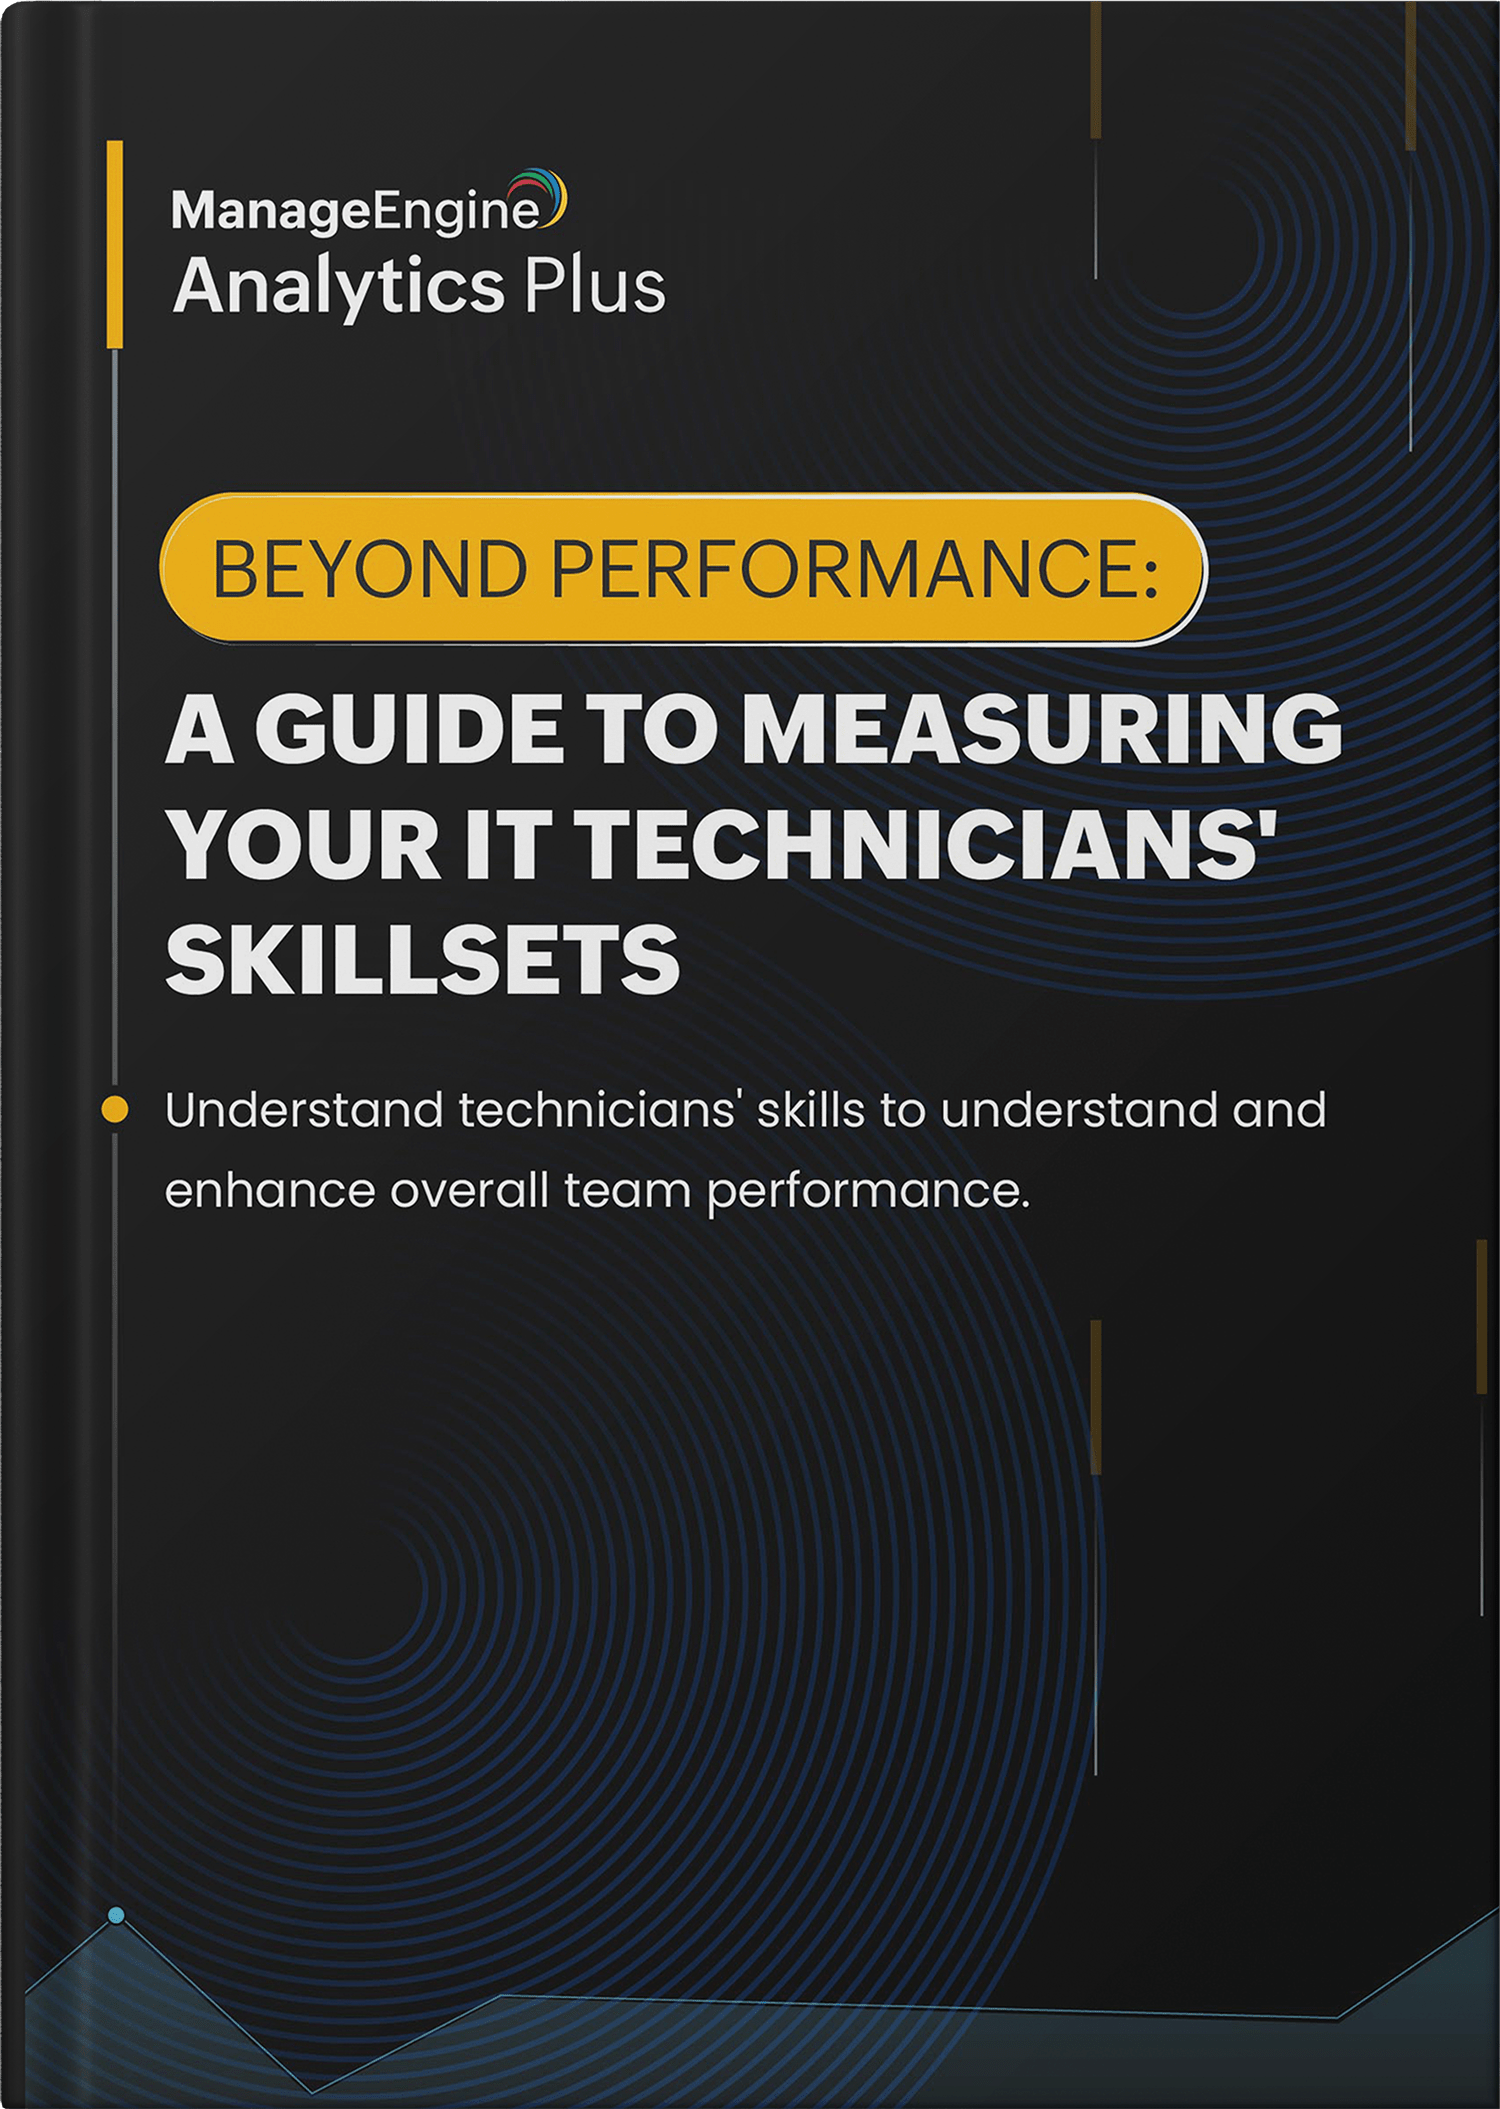 How to measure the skillsets of your IT technicians accurately